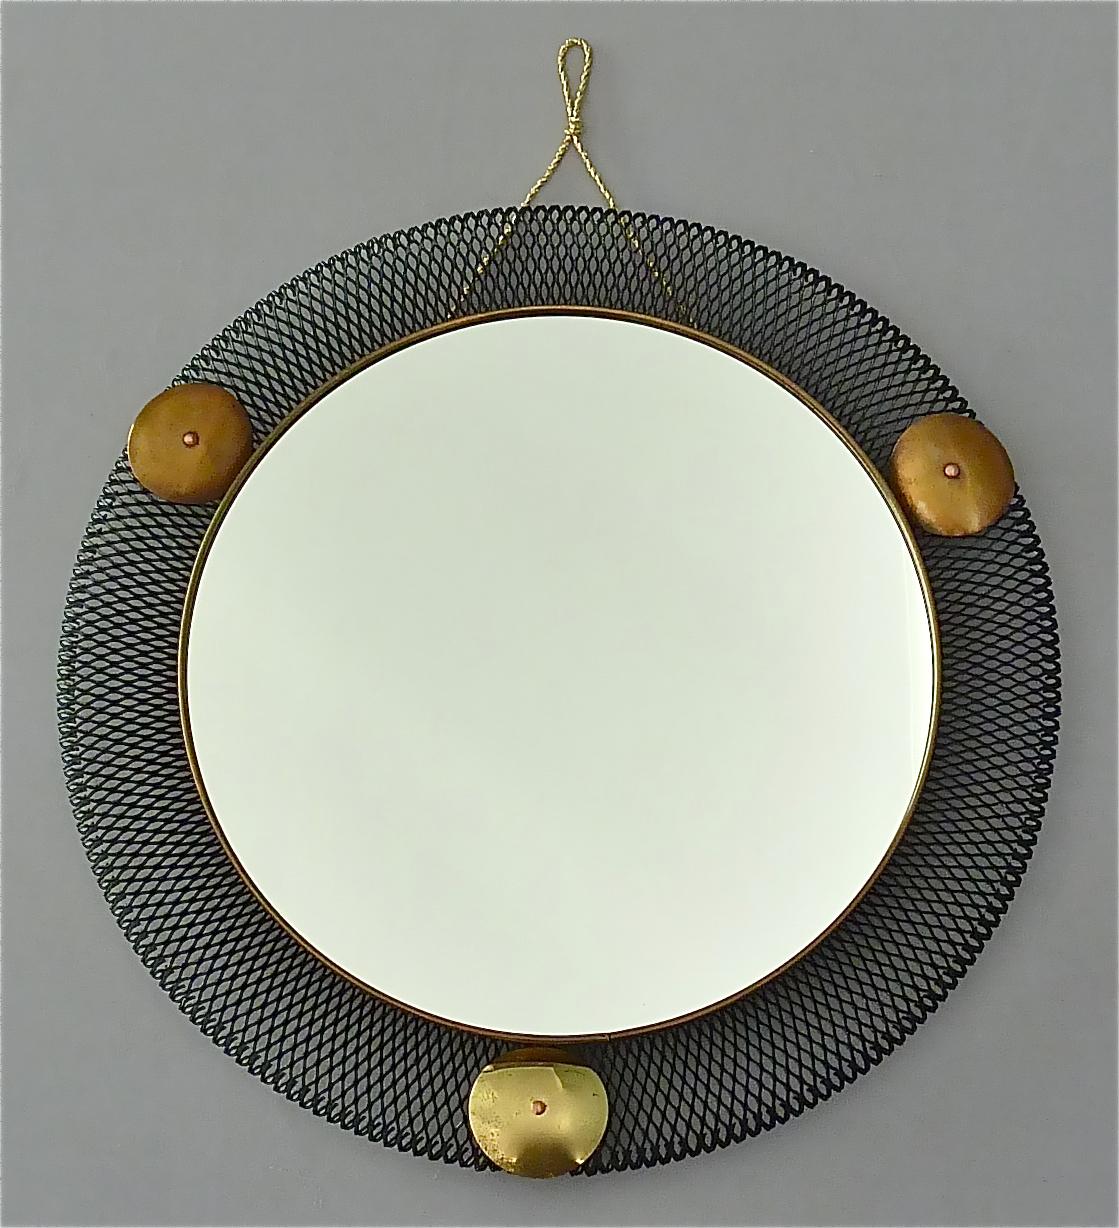 Round midcentury wall mirror which is made in the style of Jacques Biny, Mategot or Pierre Guariche, France or Italy around 1955. It is made of black lacquered or enameled stretched metal, lovely patinated brass details, mirror glass and a later